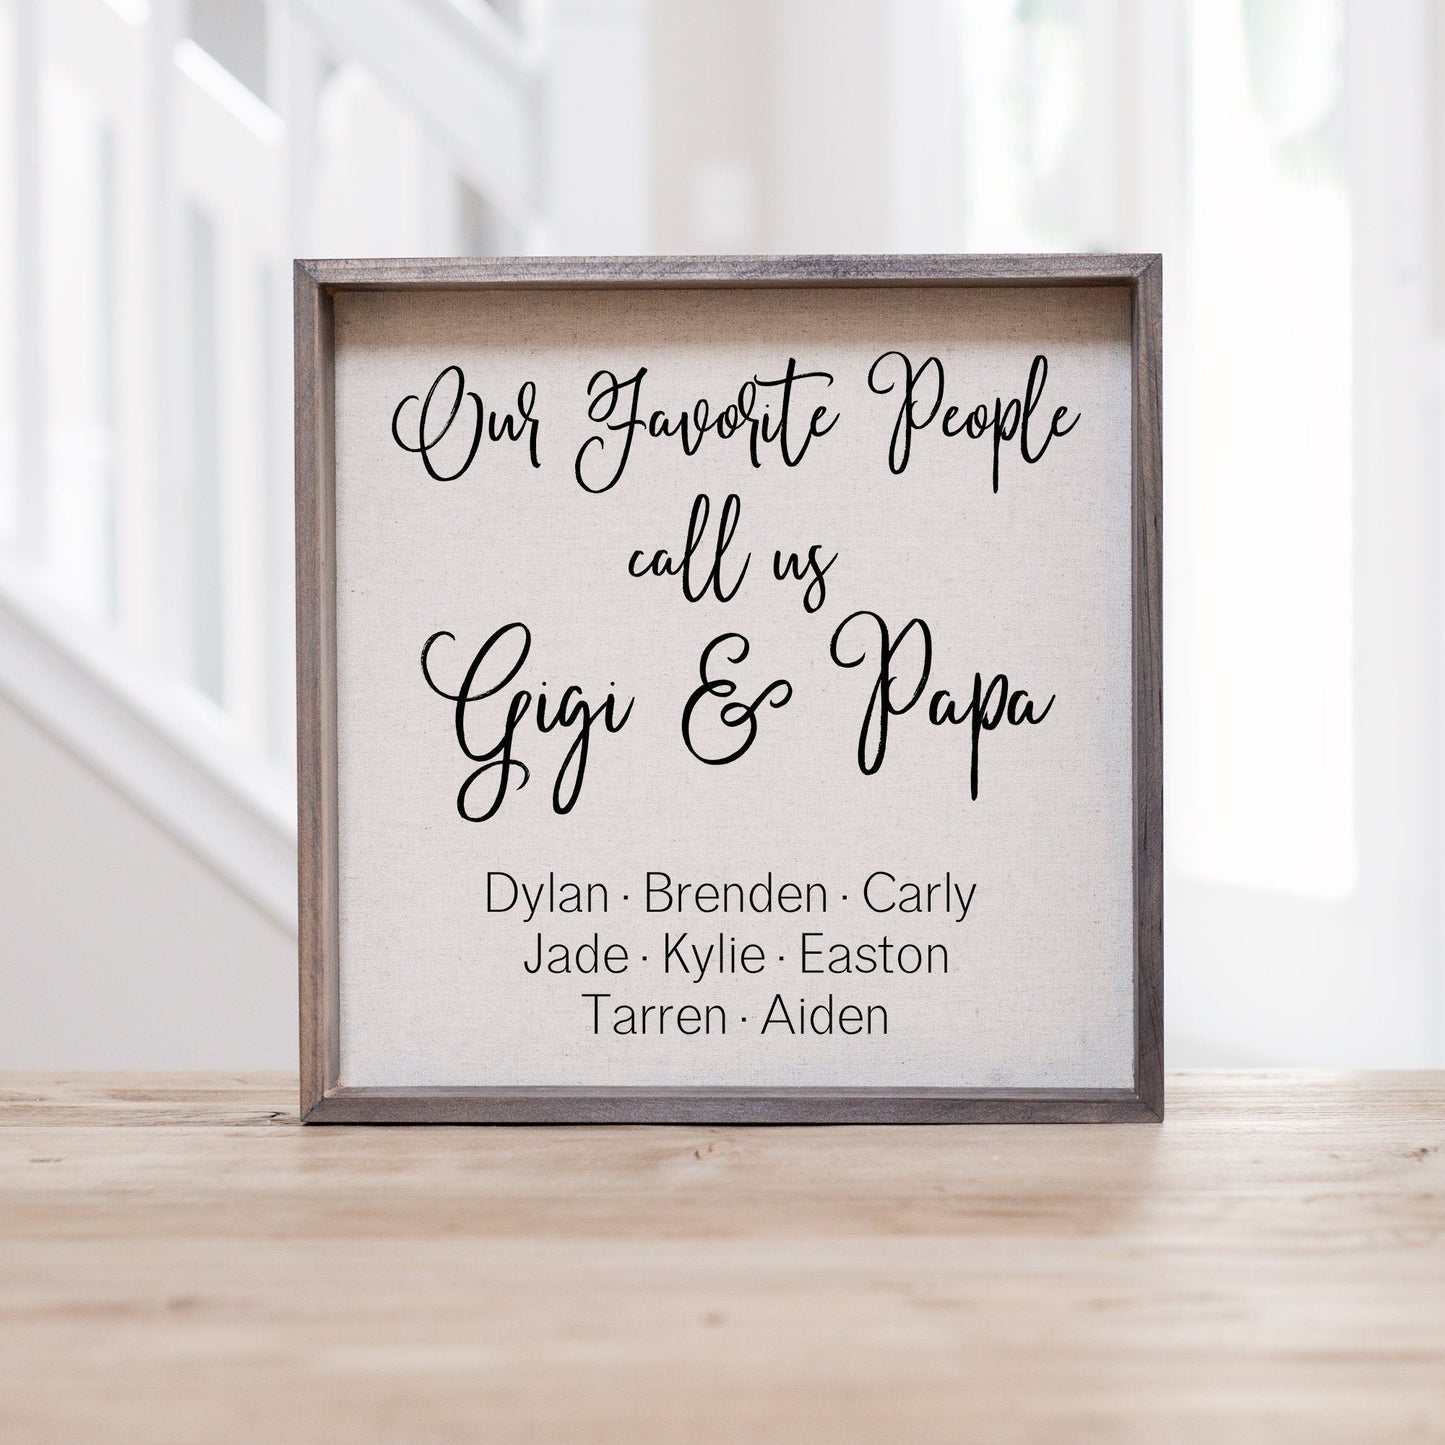 Load image into Gallery viewer, Our Favorite People Call Us Sign | Grandkids Names | Grandparent Gift | Personalized Grandchildren Names | Gift For Grandparents | Wood Sign
